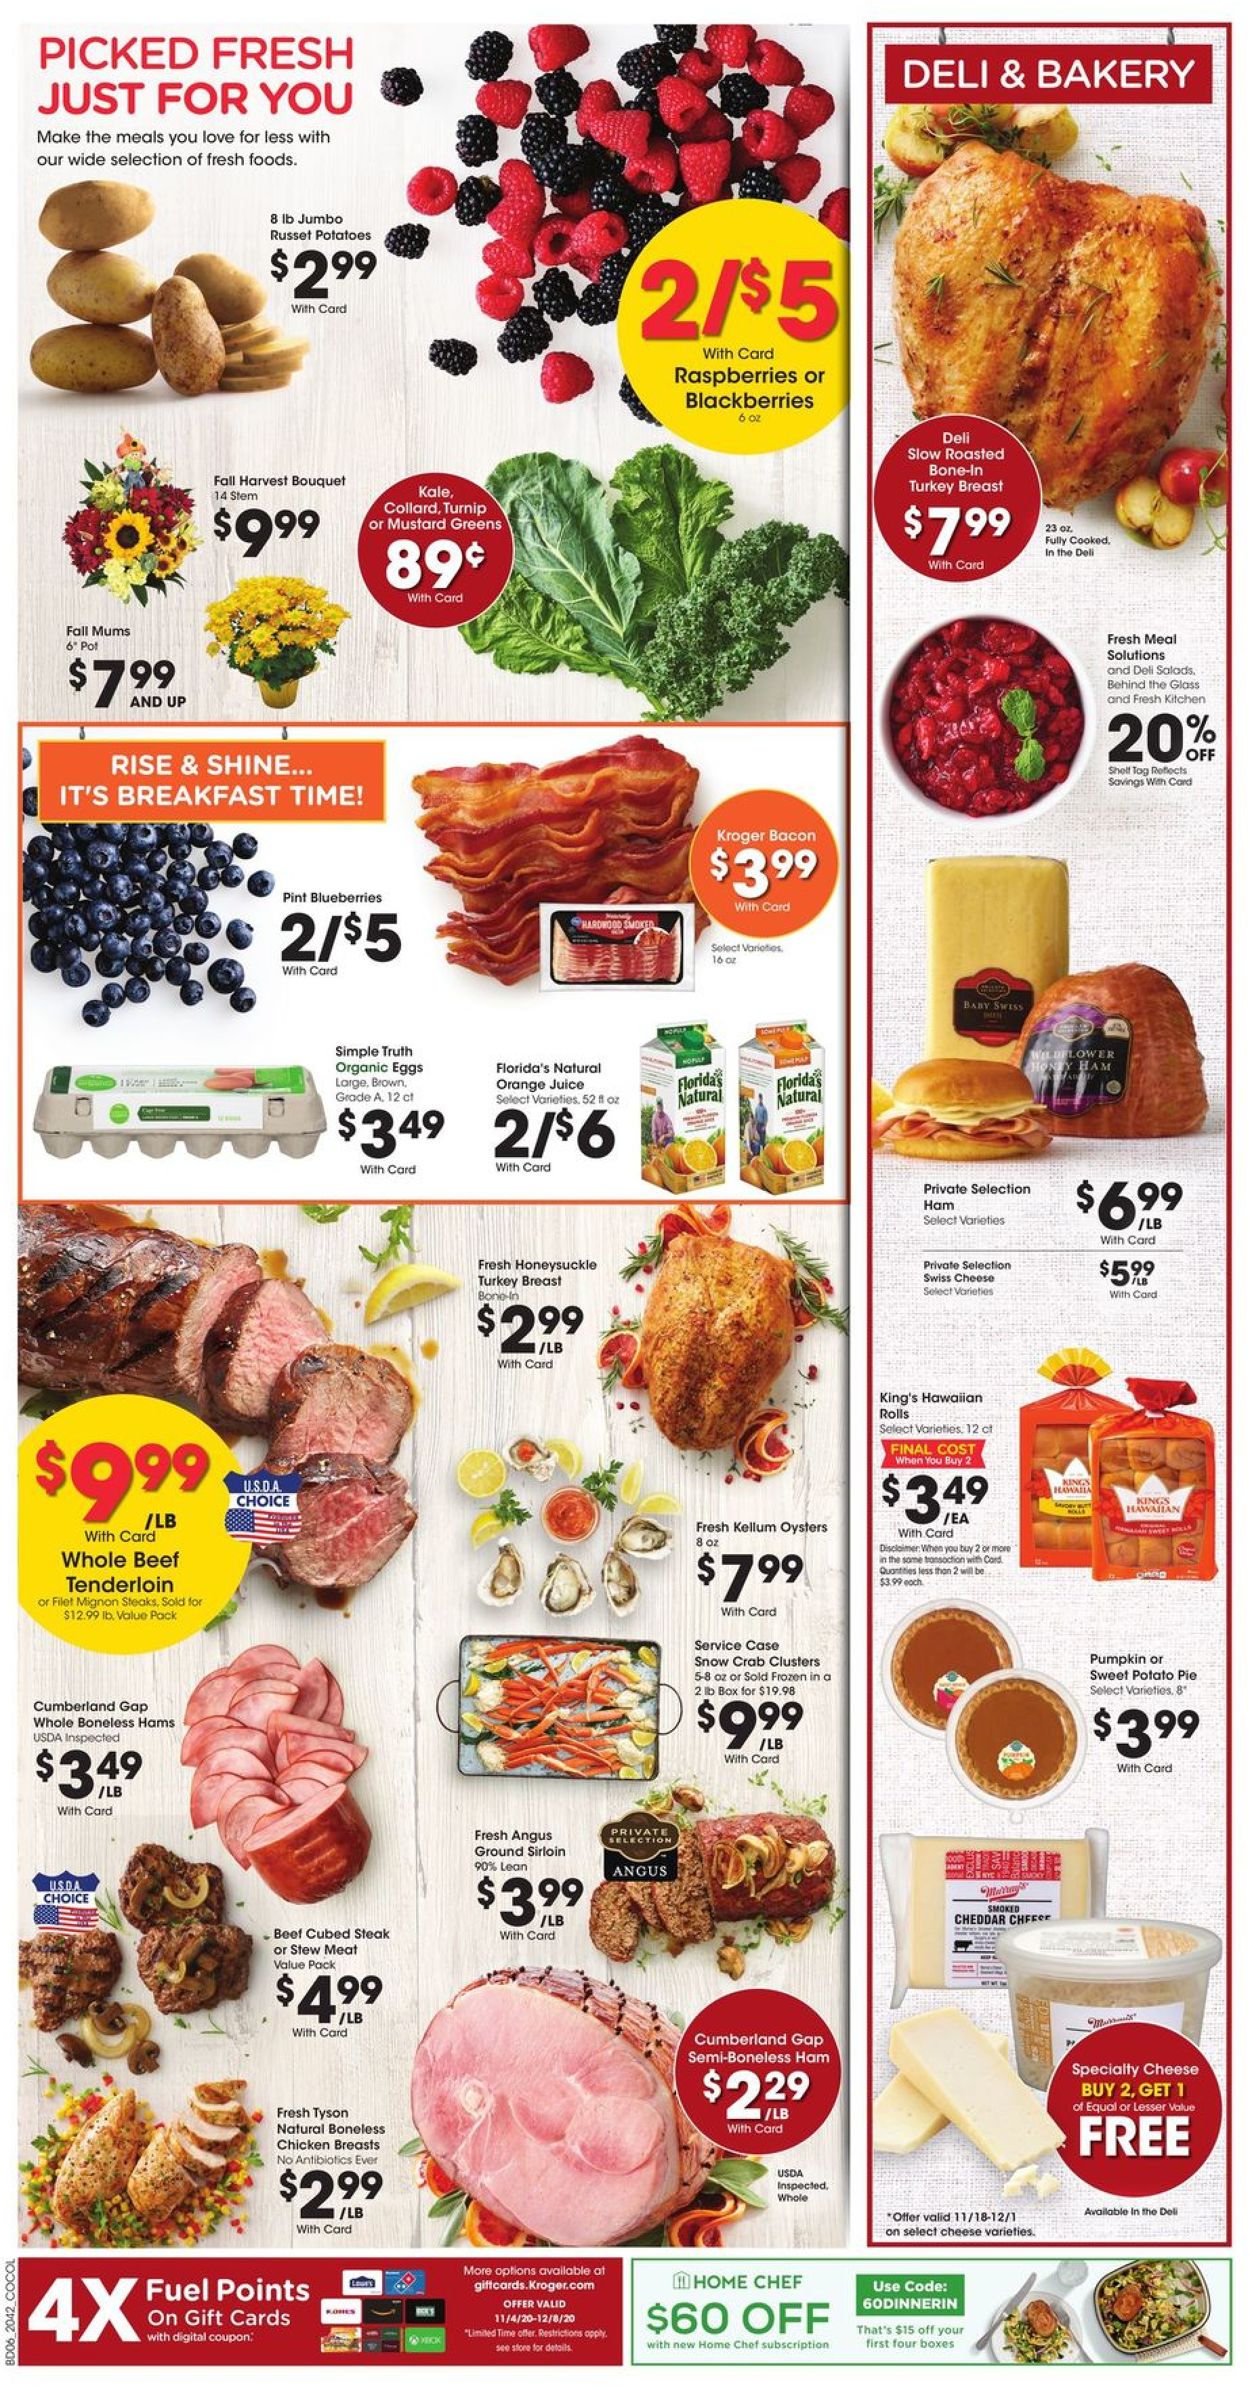 Kroger Thanksgiving 2020 Current weekly ad 11/19 11/26/2020 [7